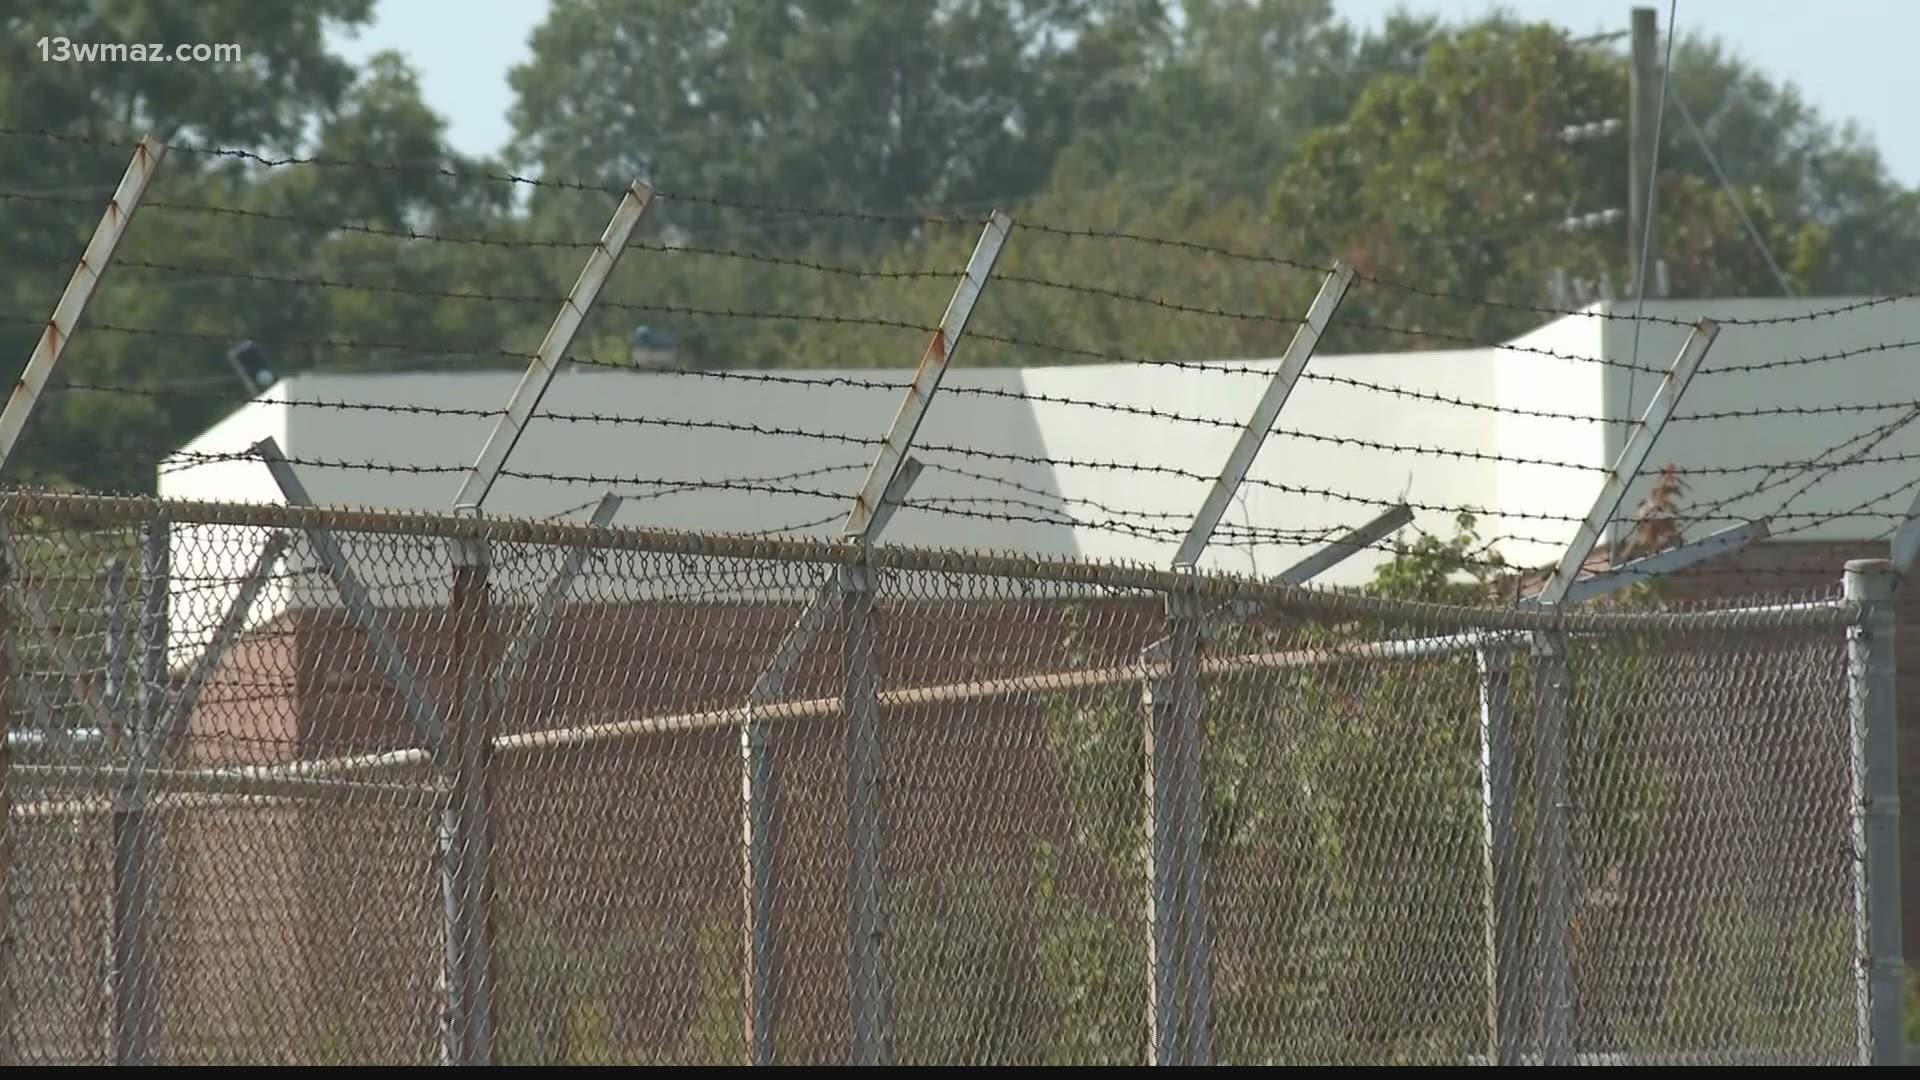 More than five dozen inmates and suspects have been from the Bibb County jail since mid-January.